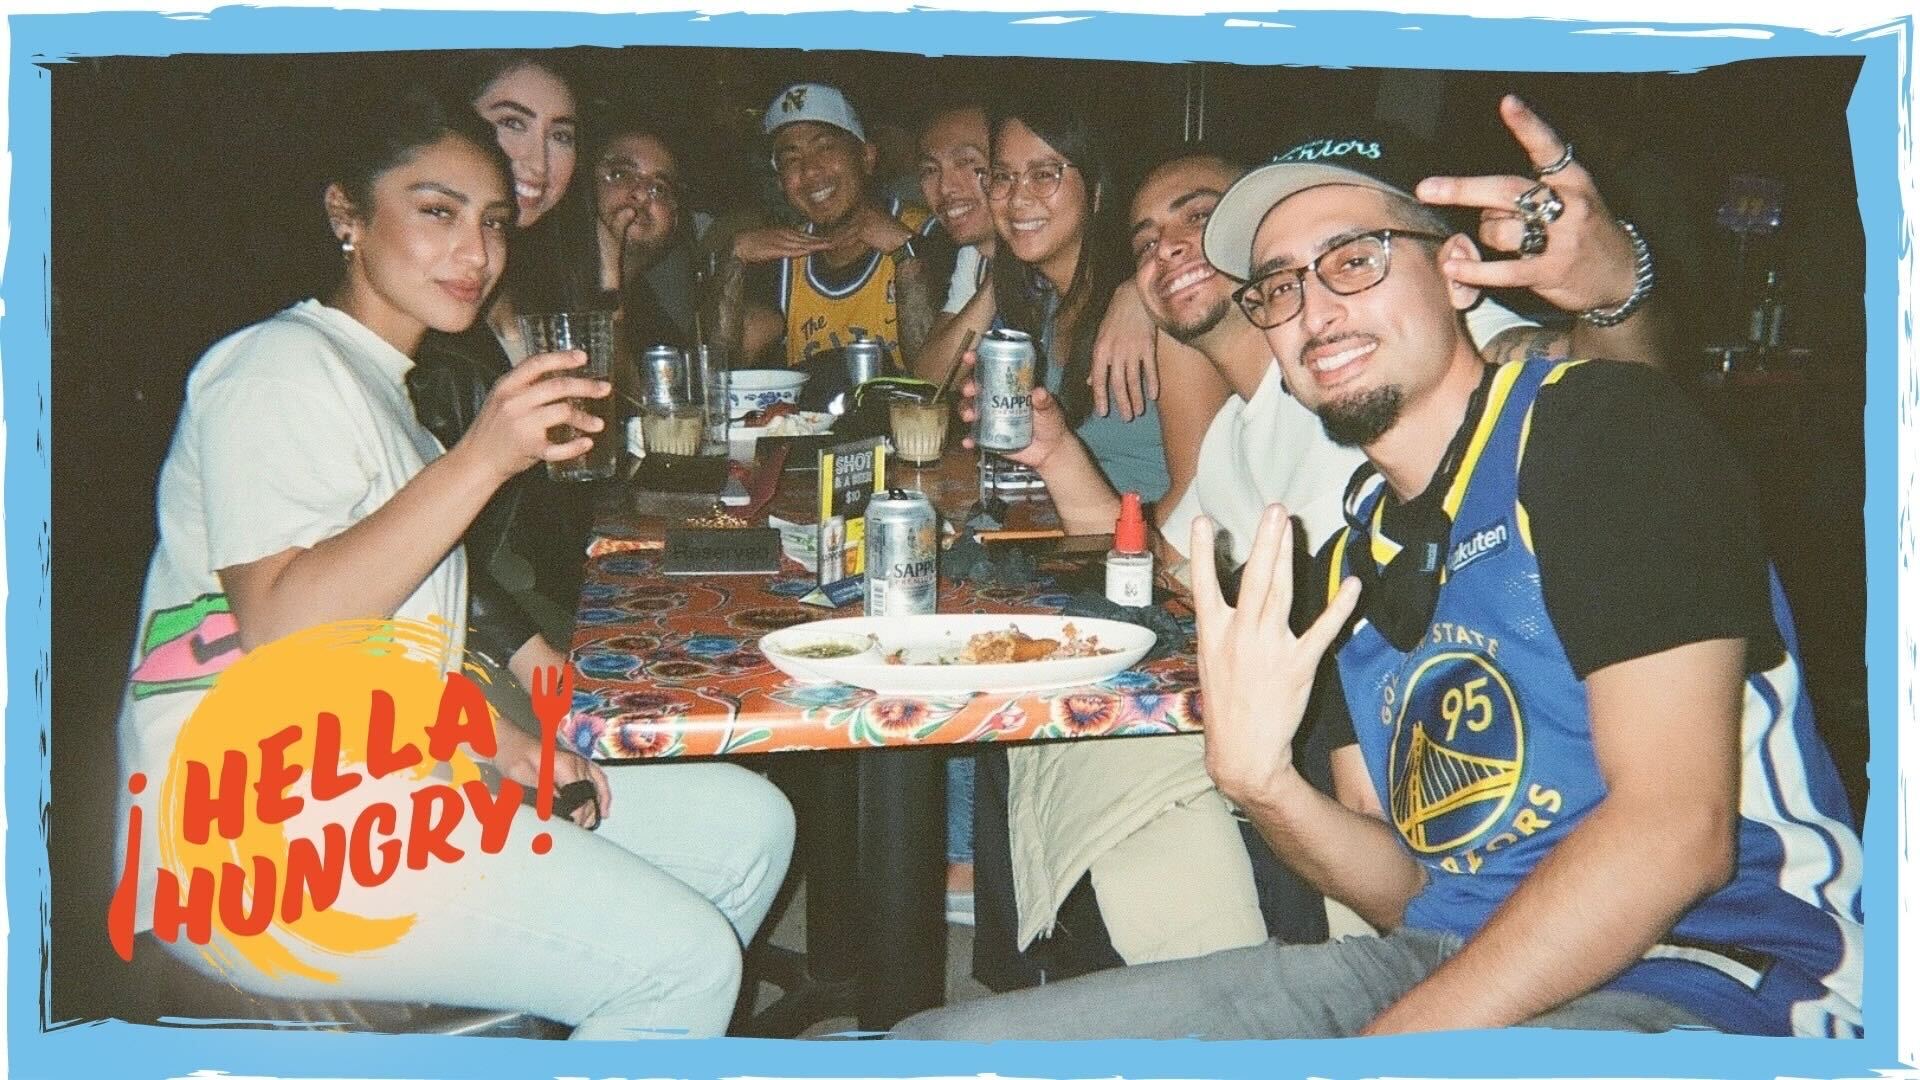 A group of friends pose for a photo while sitting at a table at a restaurant.